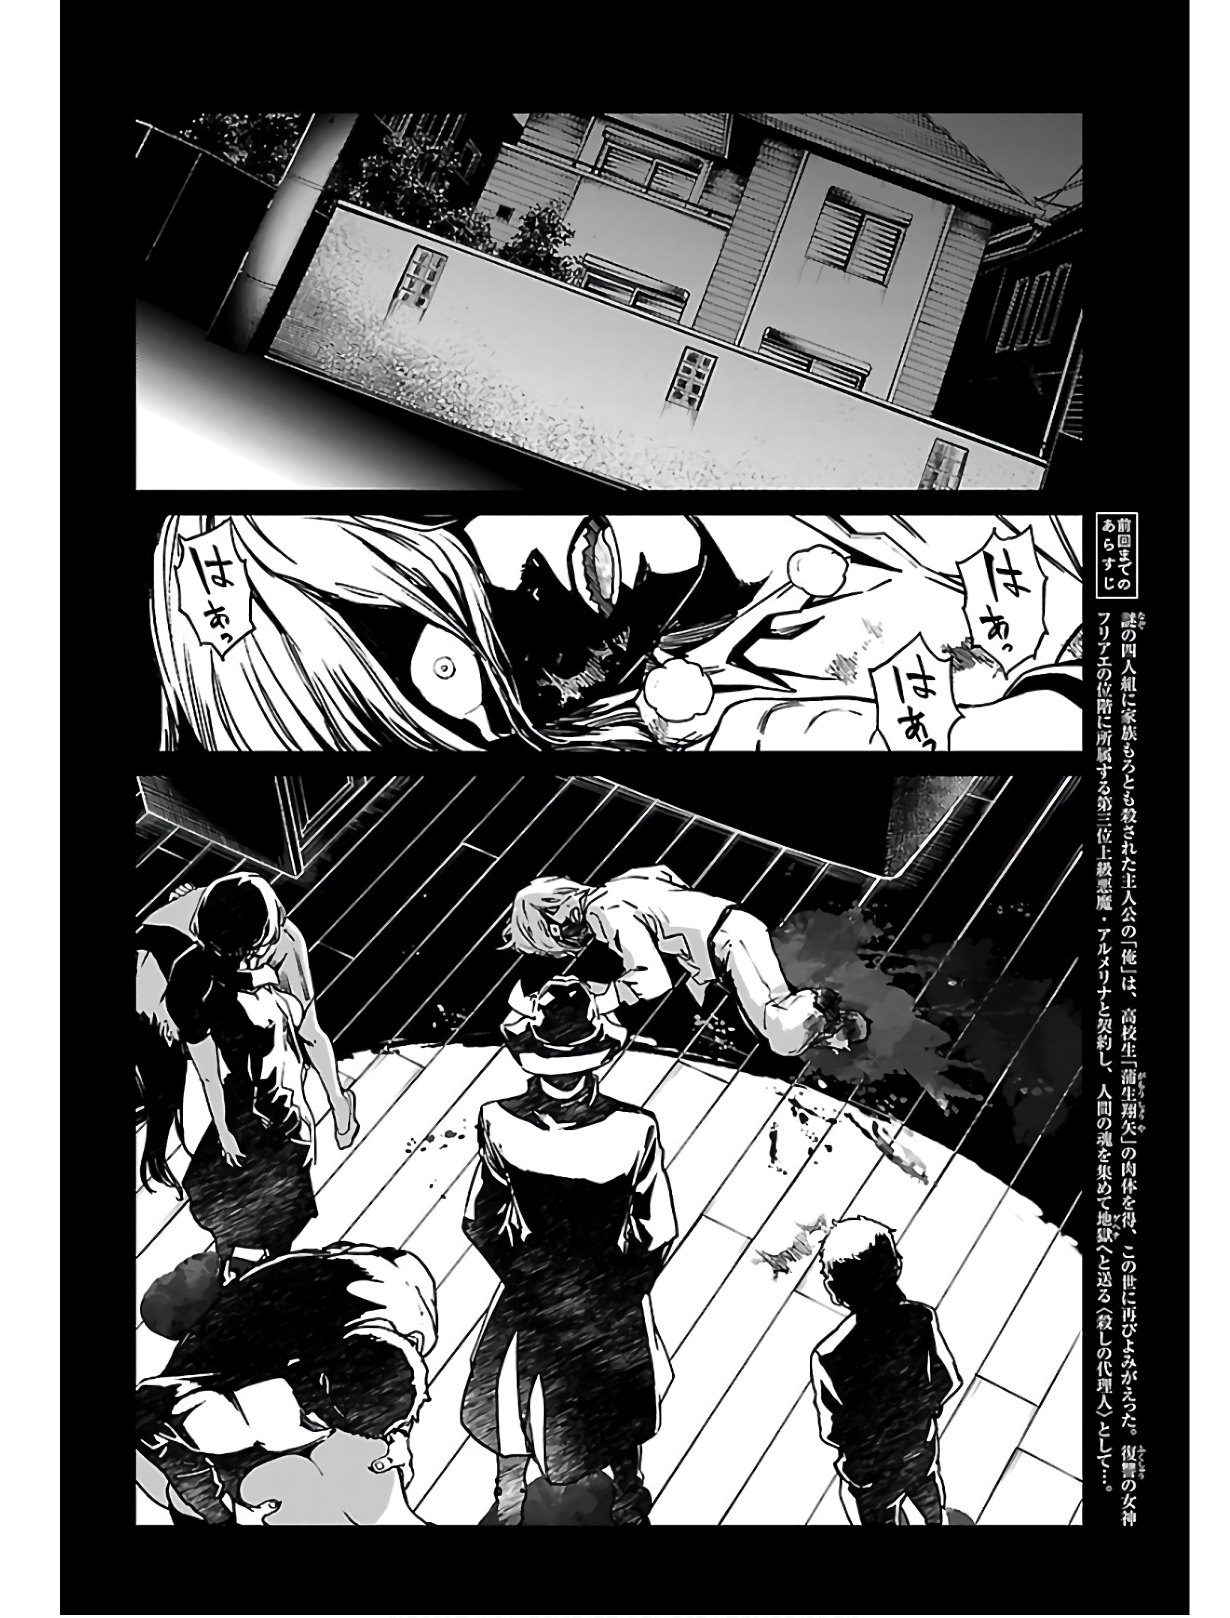 Succubus and Hitman - Chapter 2 - Page 2